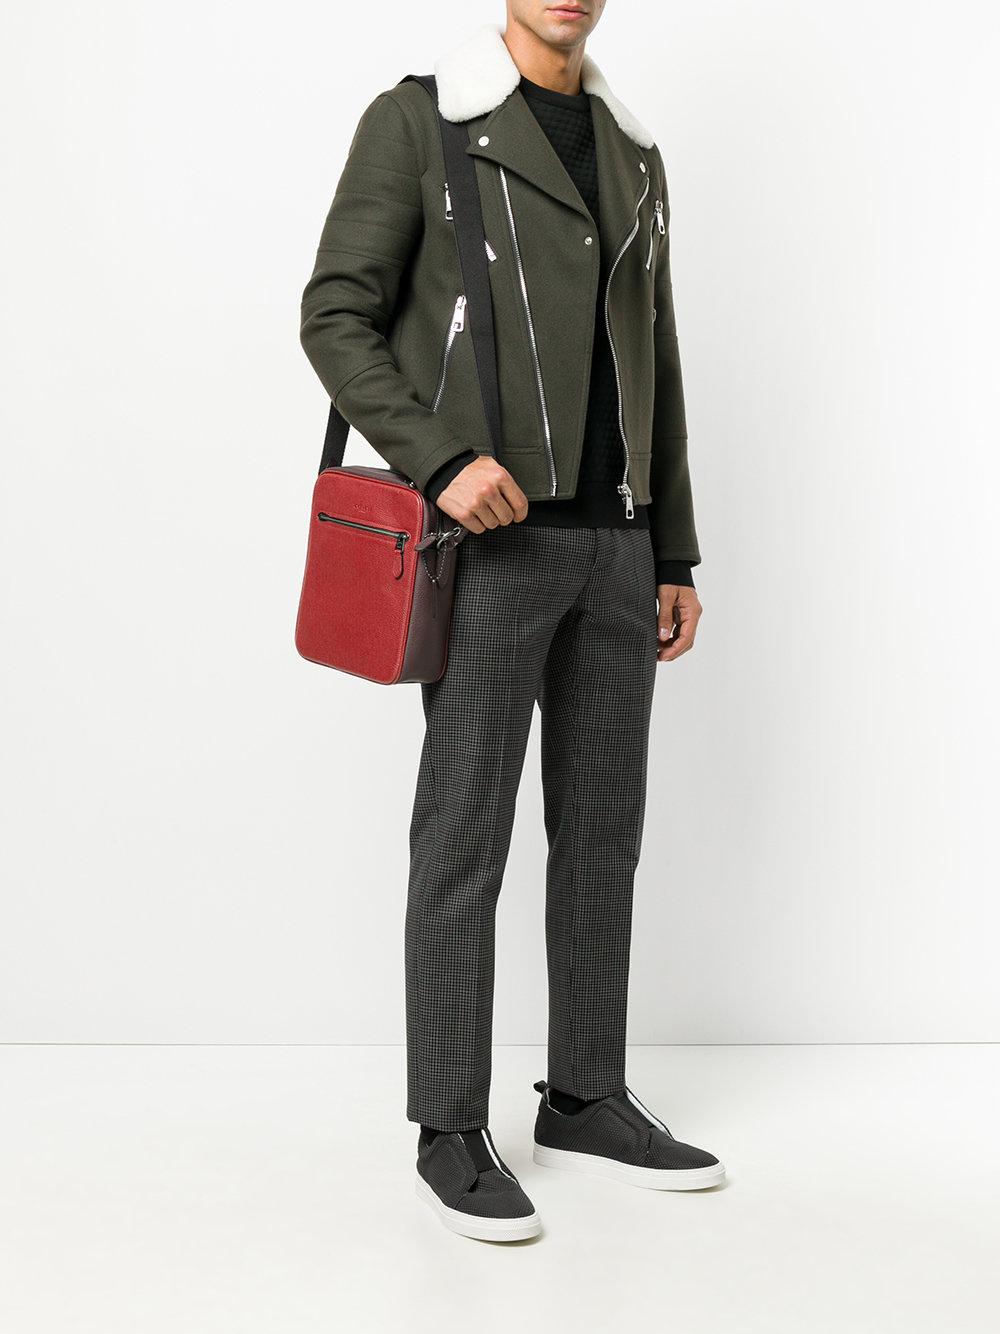 Lyst - Coach Classic Messenger Bag in Red for Men